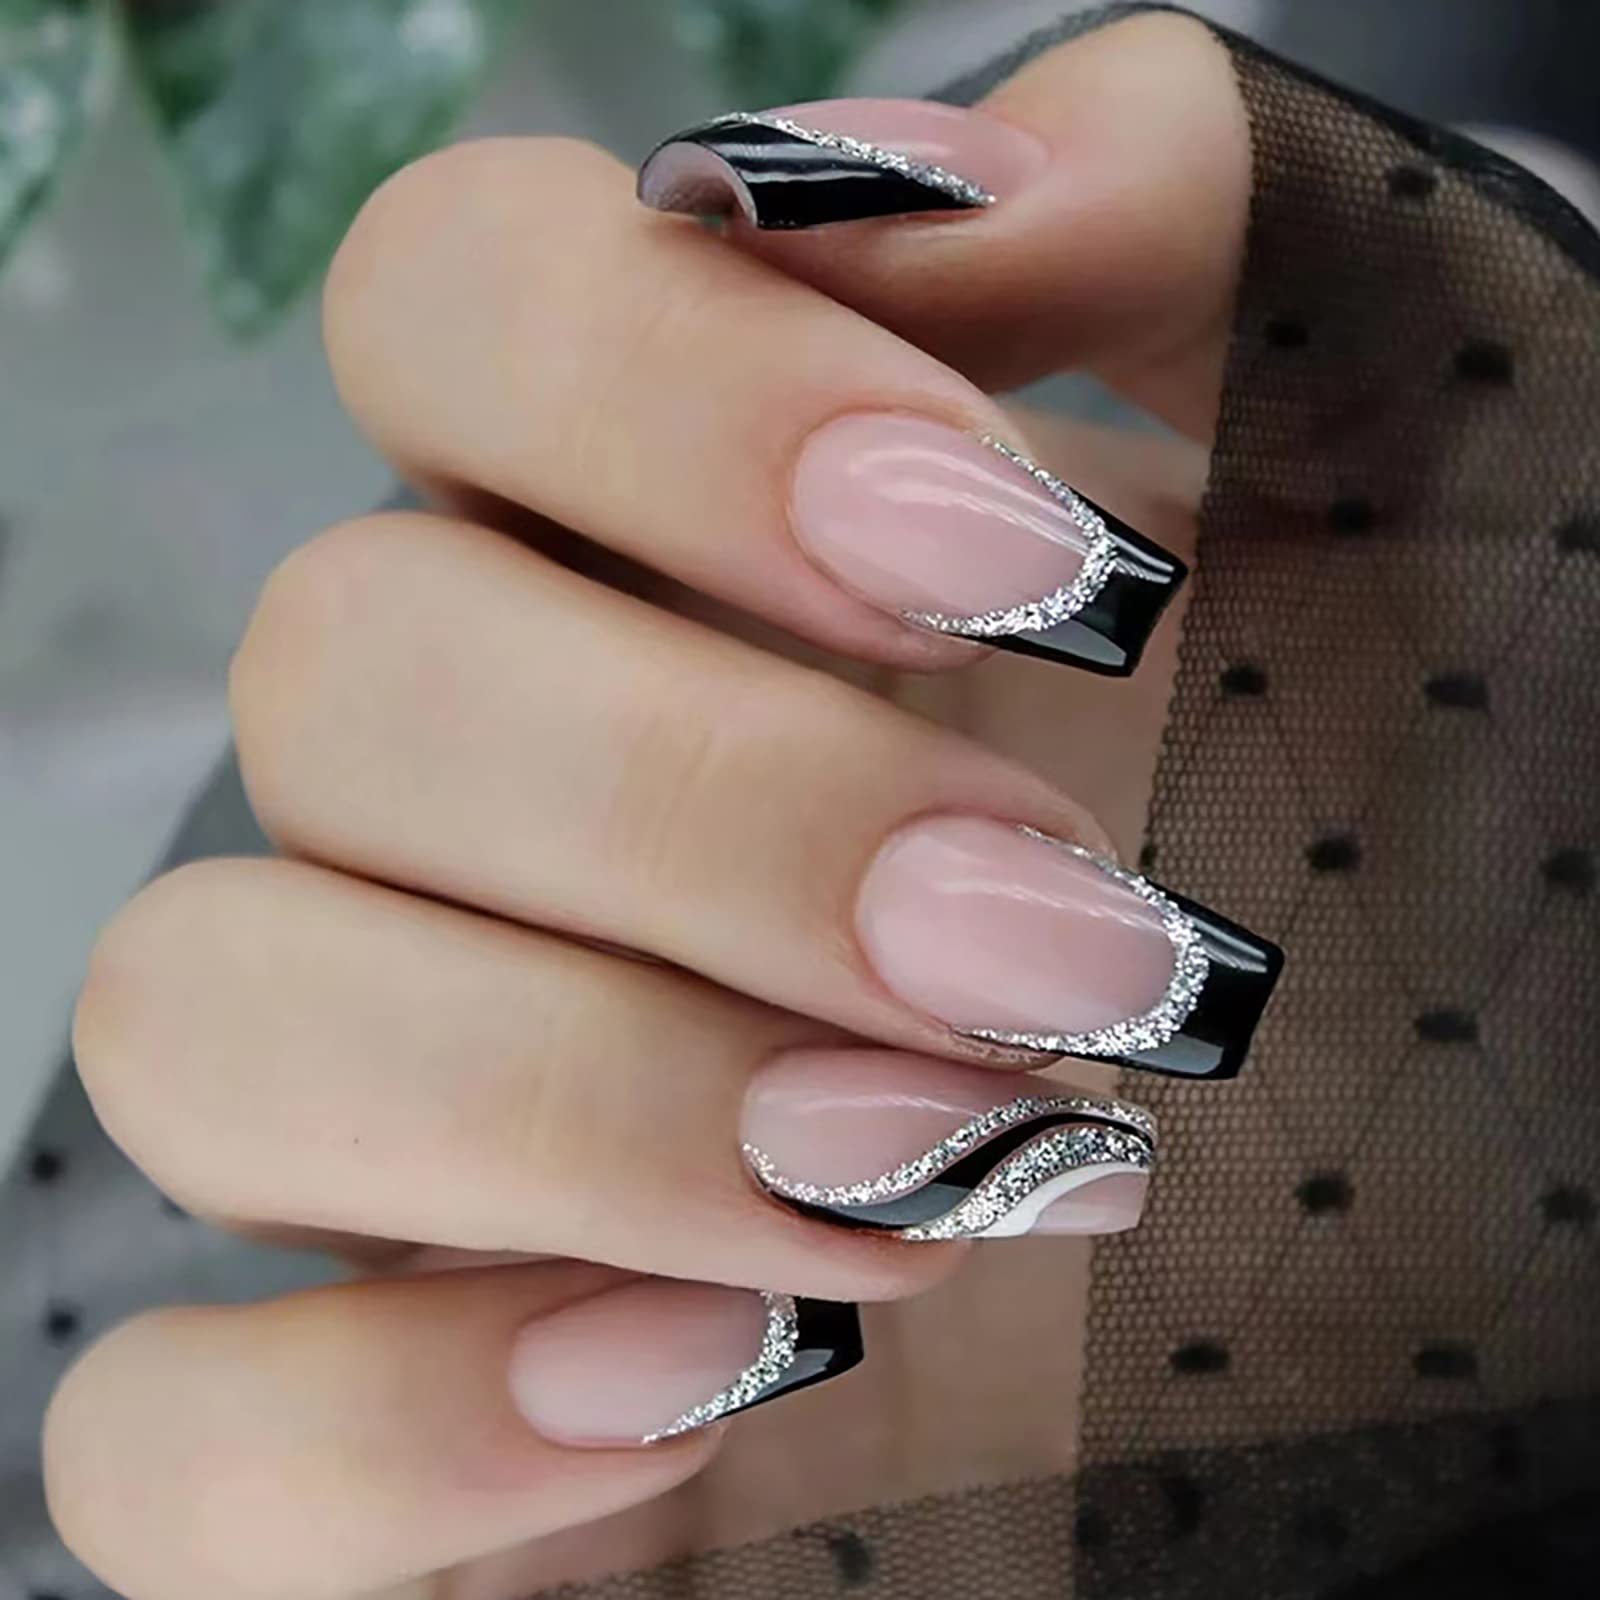 Shimmer Glitter French Nail Art Tips Classic Black Short Full Wrap Acrylic  False Nails DIY Finger Patch Makeup Accessories Z921 From Eugenel, $25.18 |  DHgate.Com